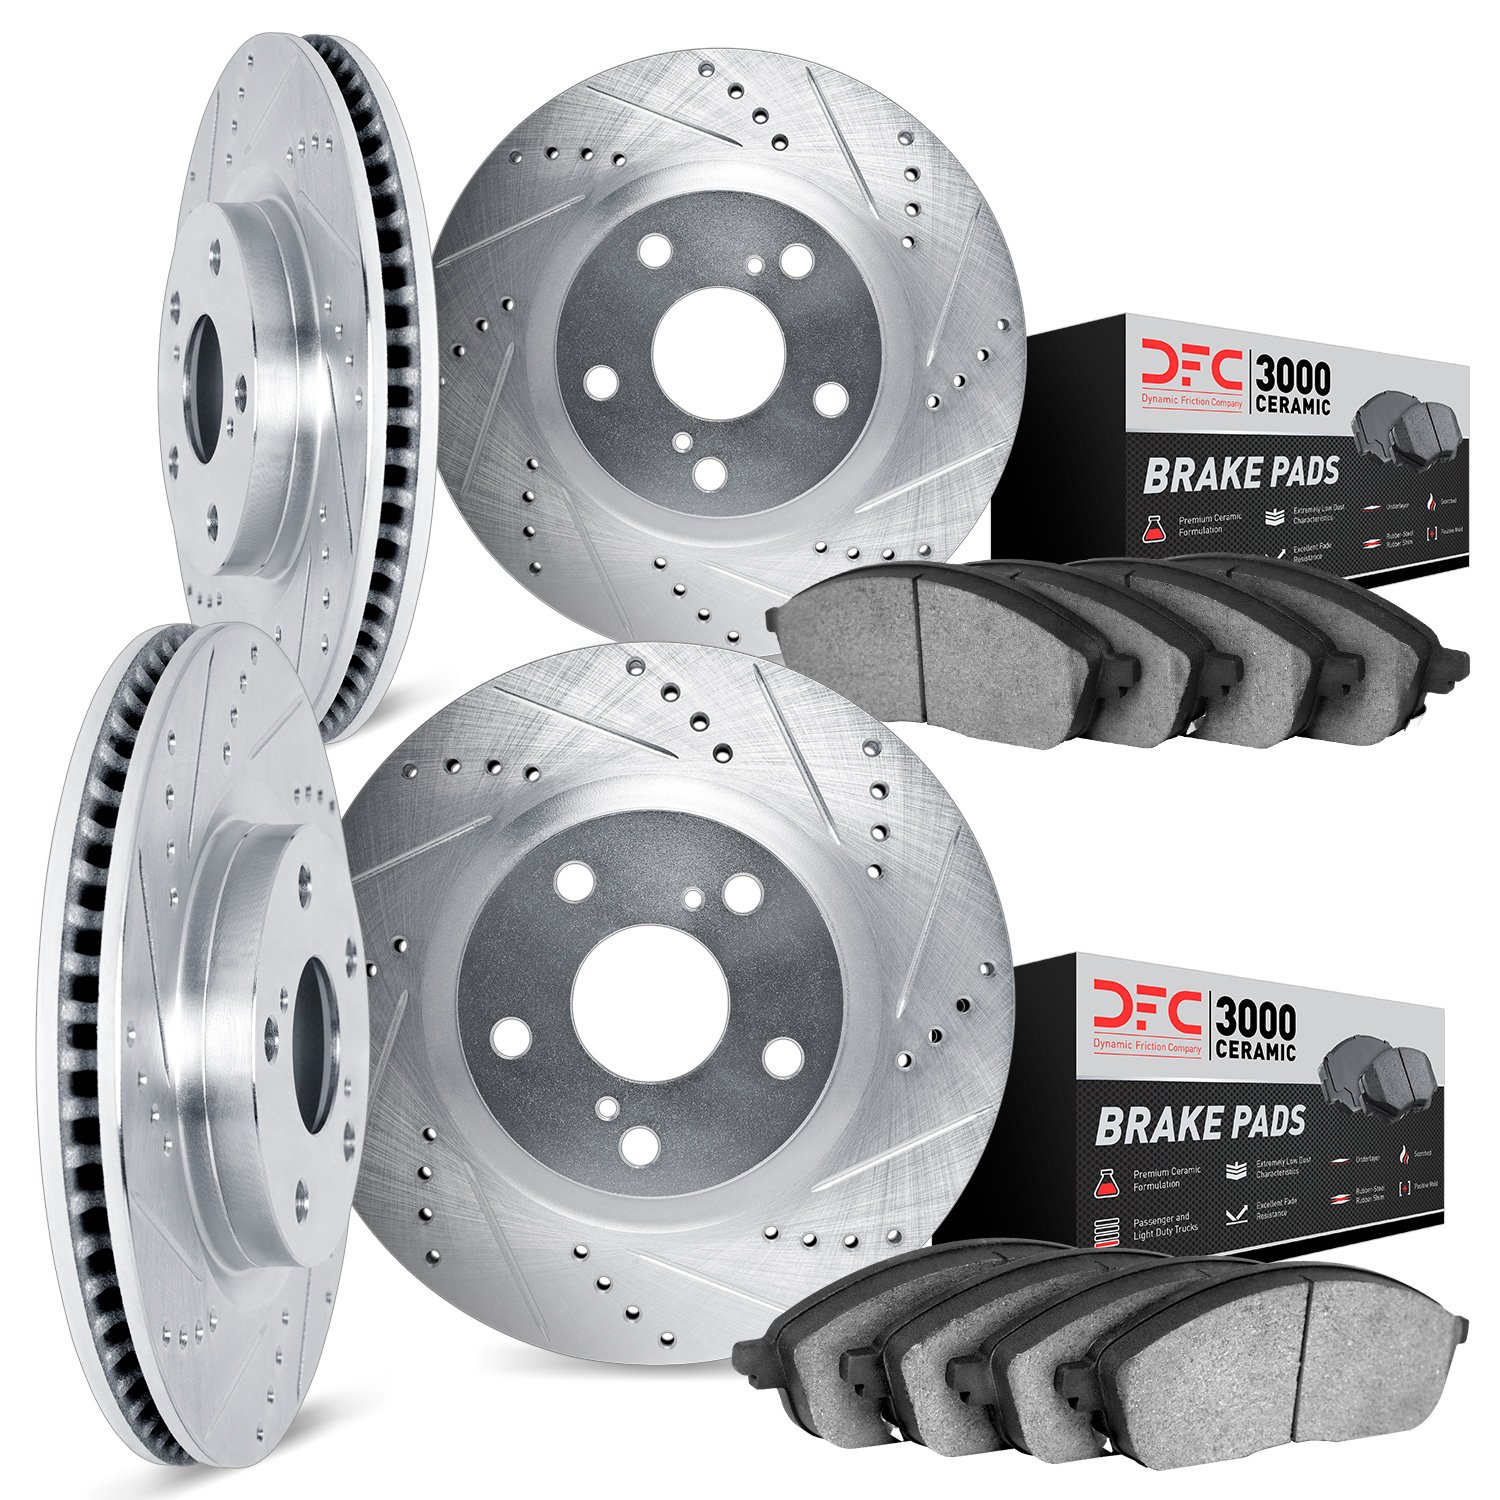 7304-13047 Drilled/Slotted Brake Rotor with 3000-Series Ceramic Brake Pads Kit [Silver], Fits Select Multiple Makes/Models, Posi